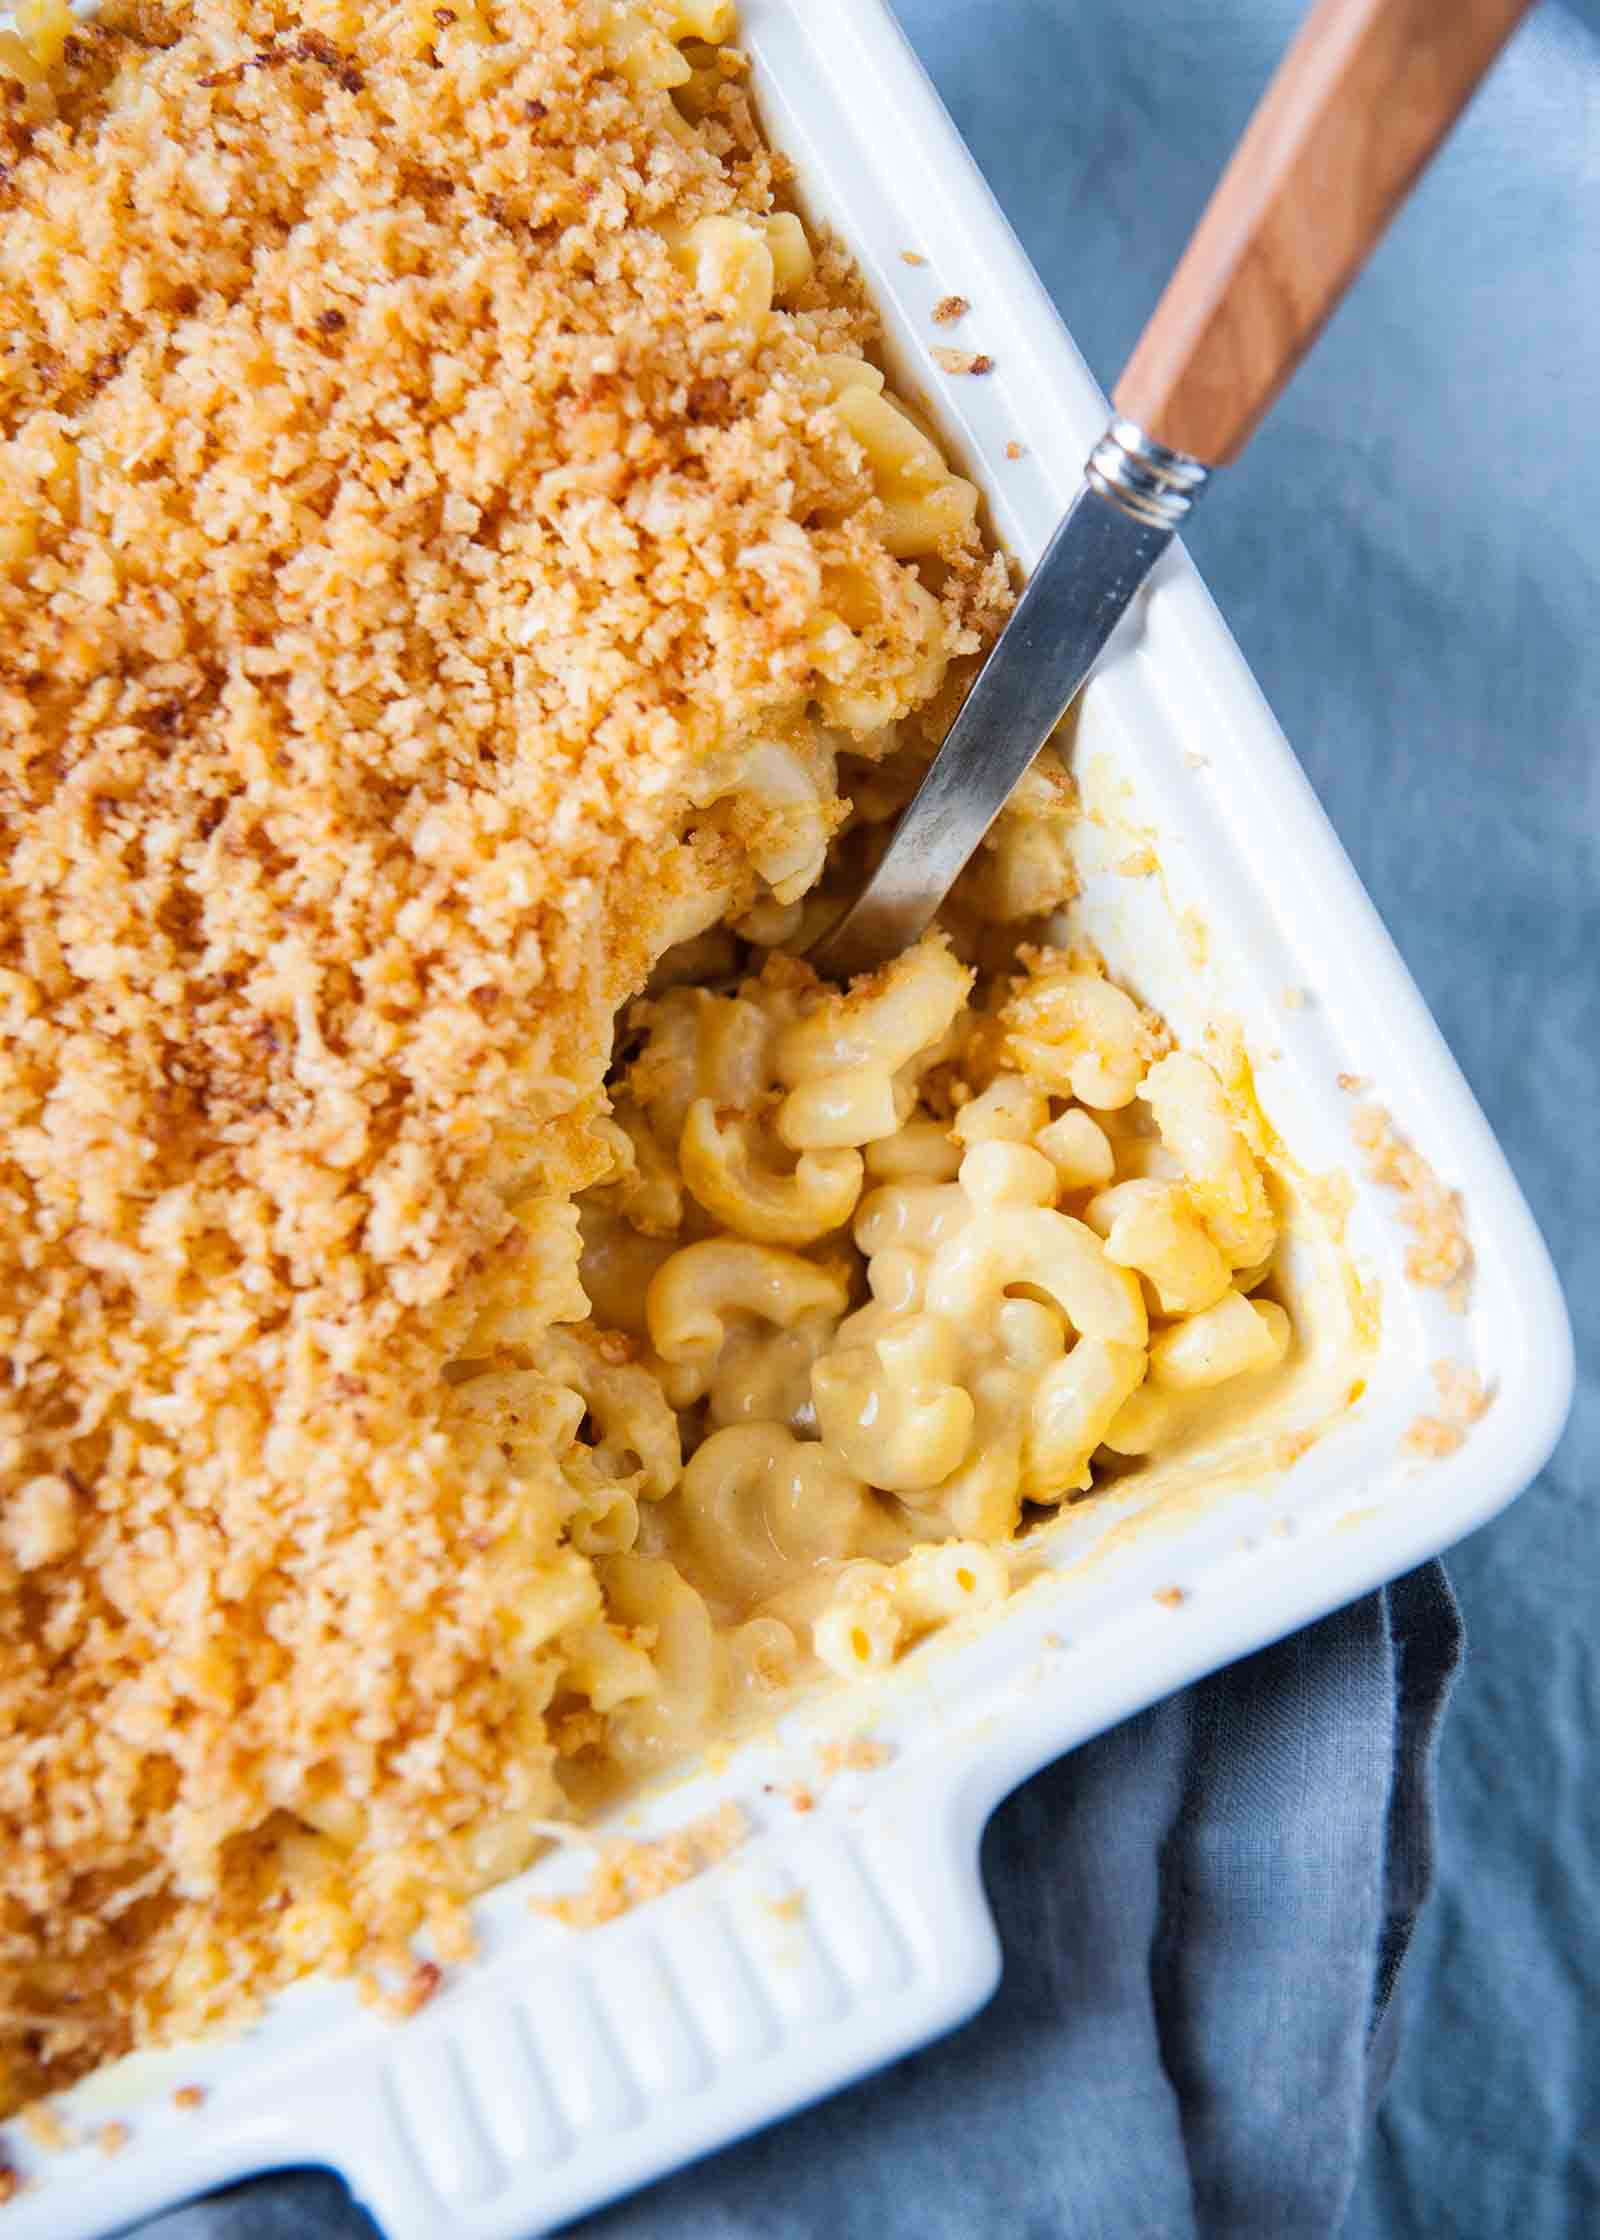 Macaroni And Cheese Baked Recipe Easy
 Creamy Baked Mac and Cheese Recipe